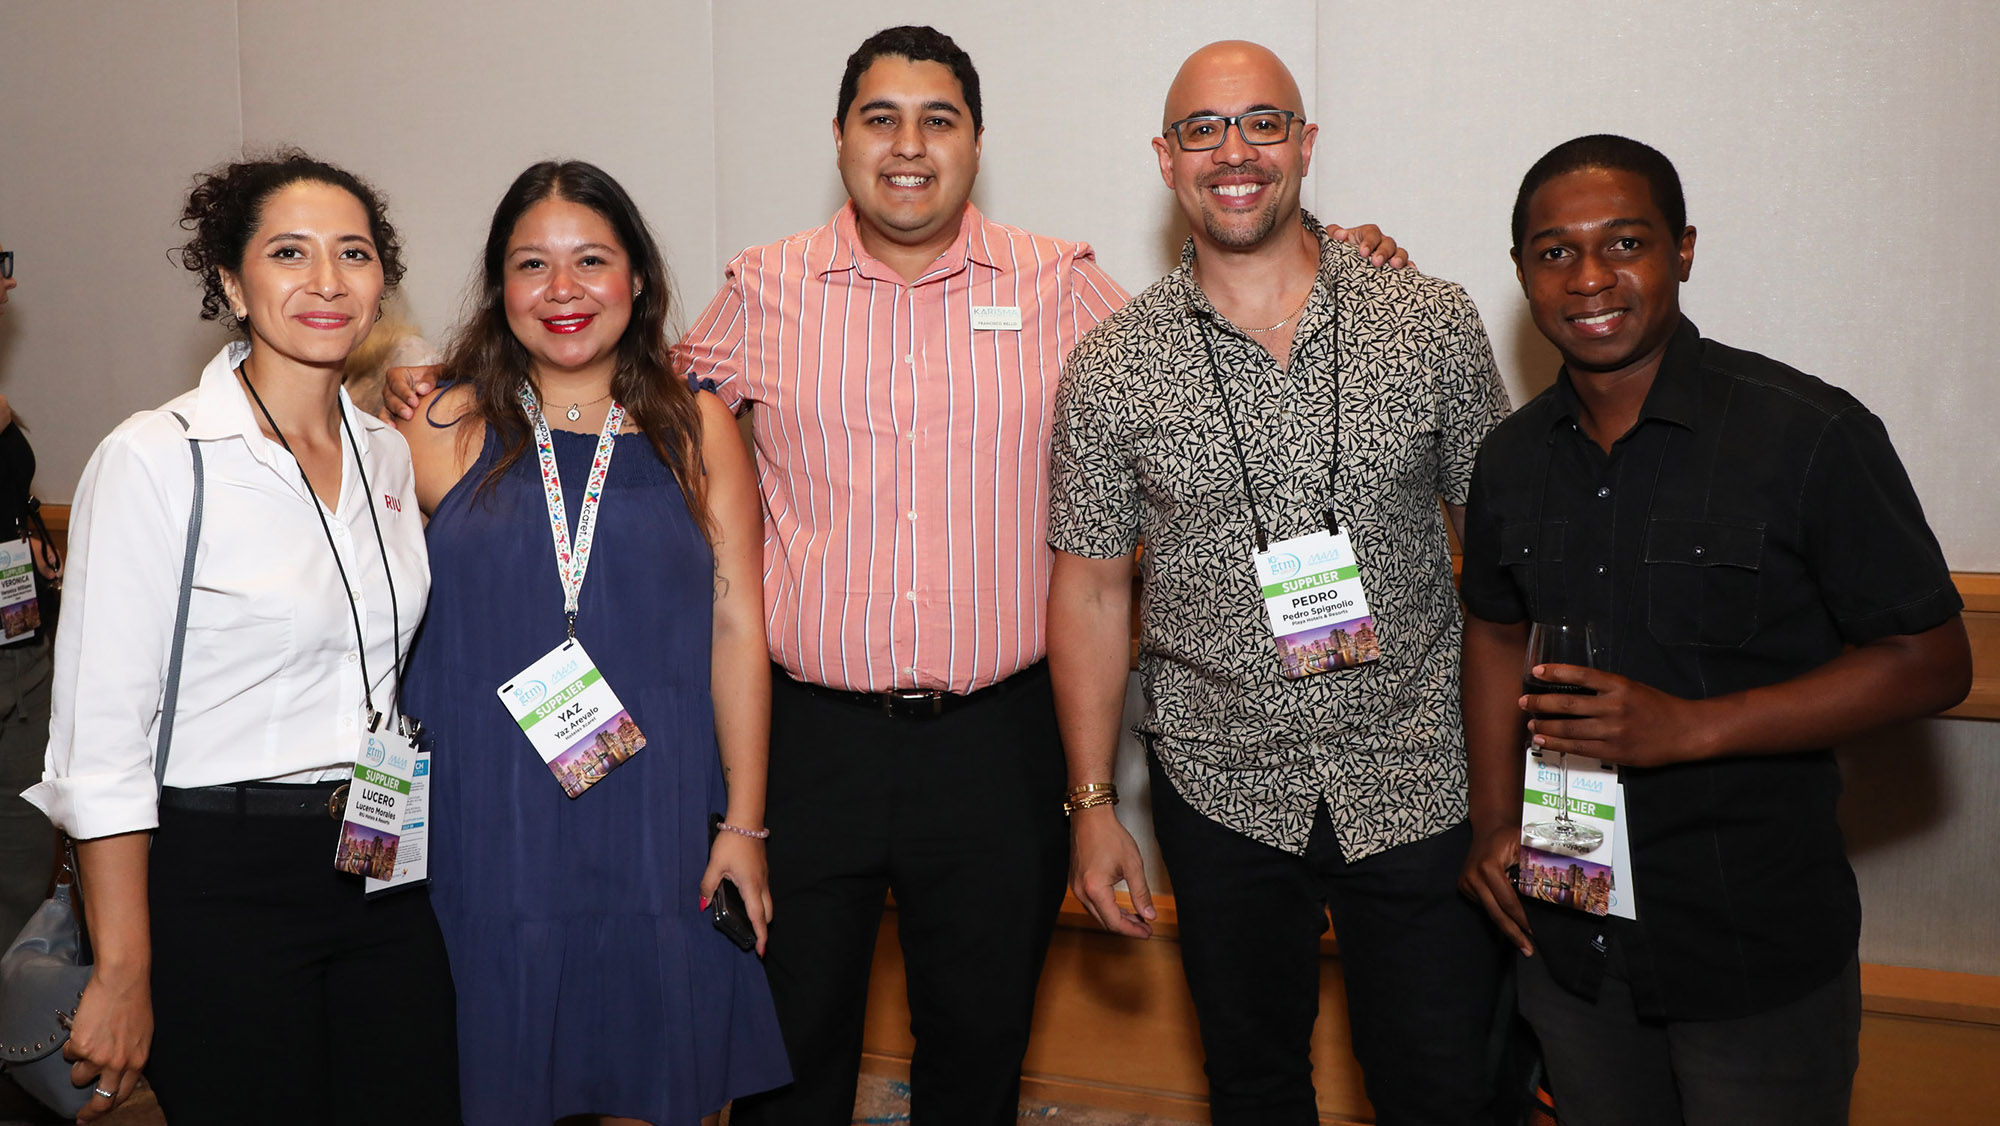 From left, Lucero Morales of RIU Hotels & Resorts; Yaz Arevalo of Hoteles Xcaret; Francisco Bello of Karisma Hotels & Resorts; Pedro Spignolio of Playa Hotels & Resorts; and Ruel Campbell of Virgin Voyages at the supplier-only meet and greet at GTM.